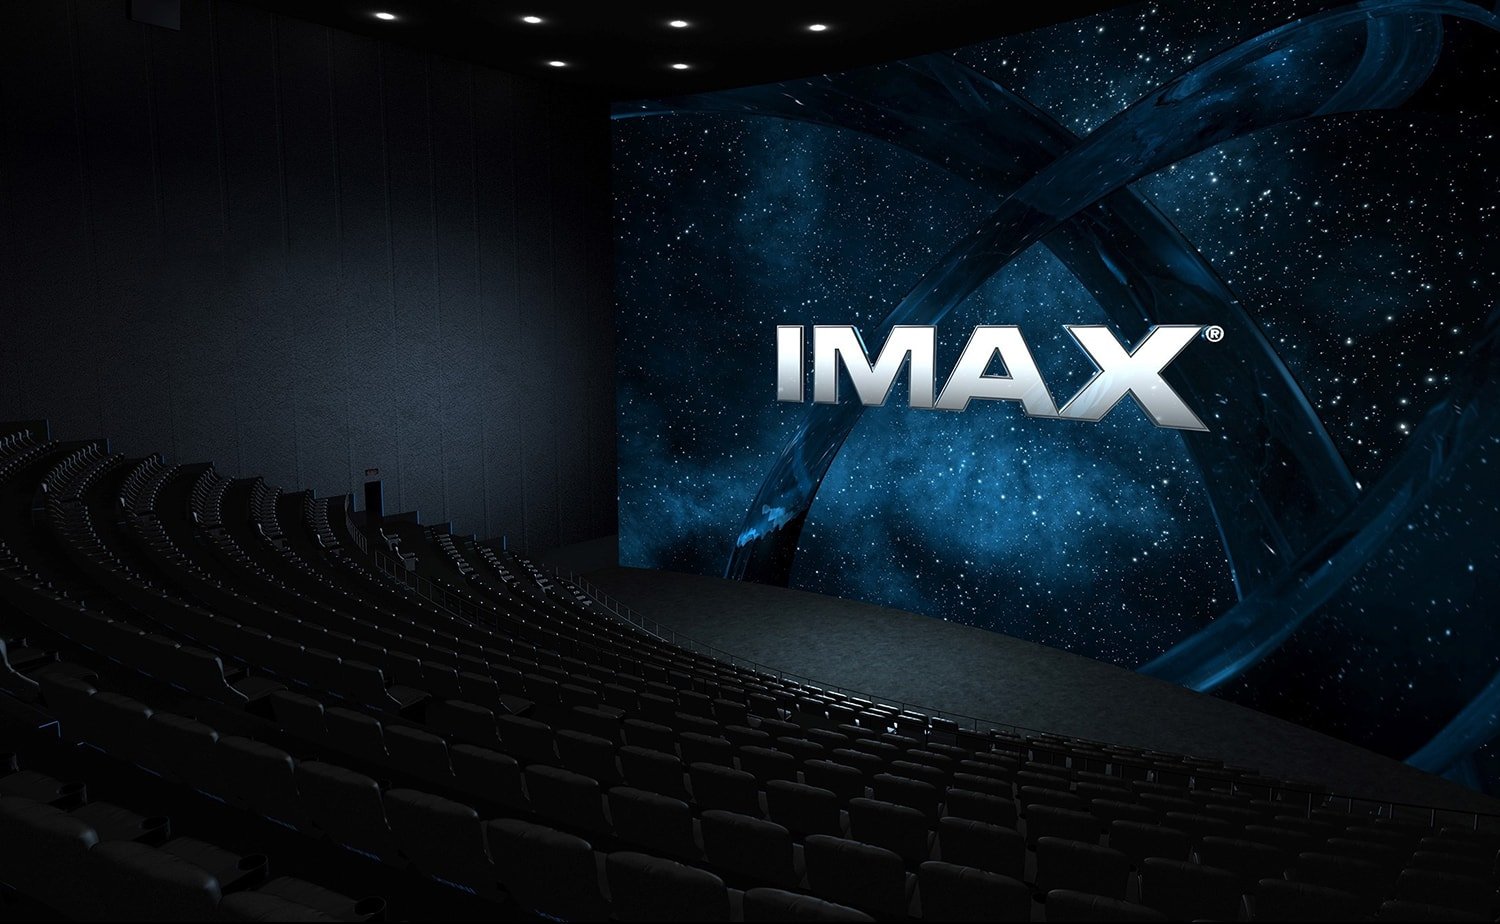 IMAX Announces 14 Titles in its 2025 Slate Filmed Specifically for IMAX